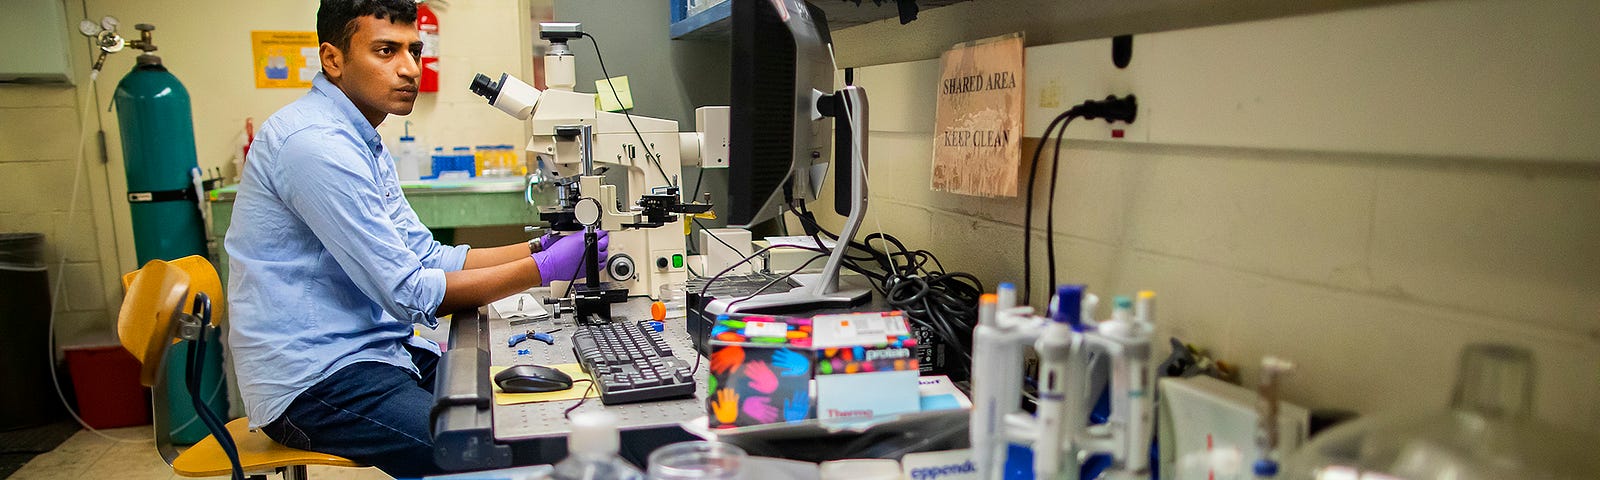 Sriram sits in front of a microscope on lab bench piled high with supplies.